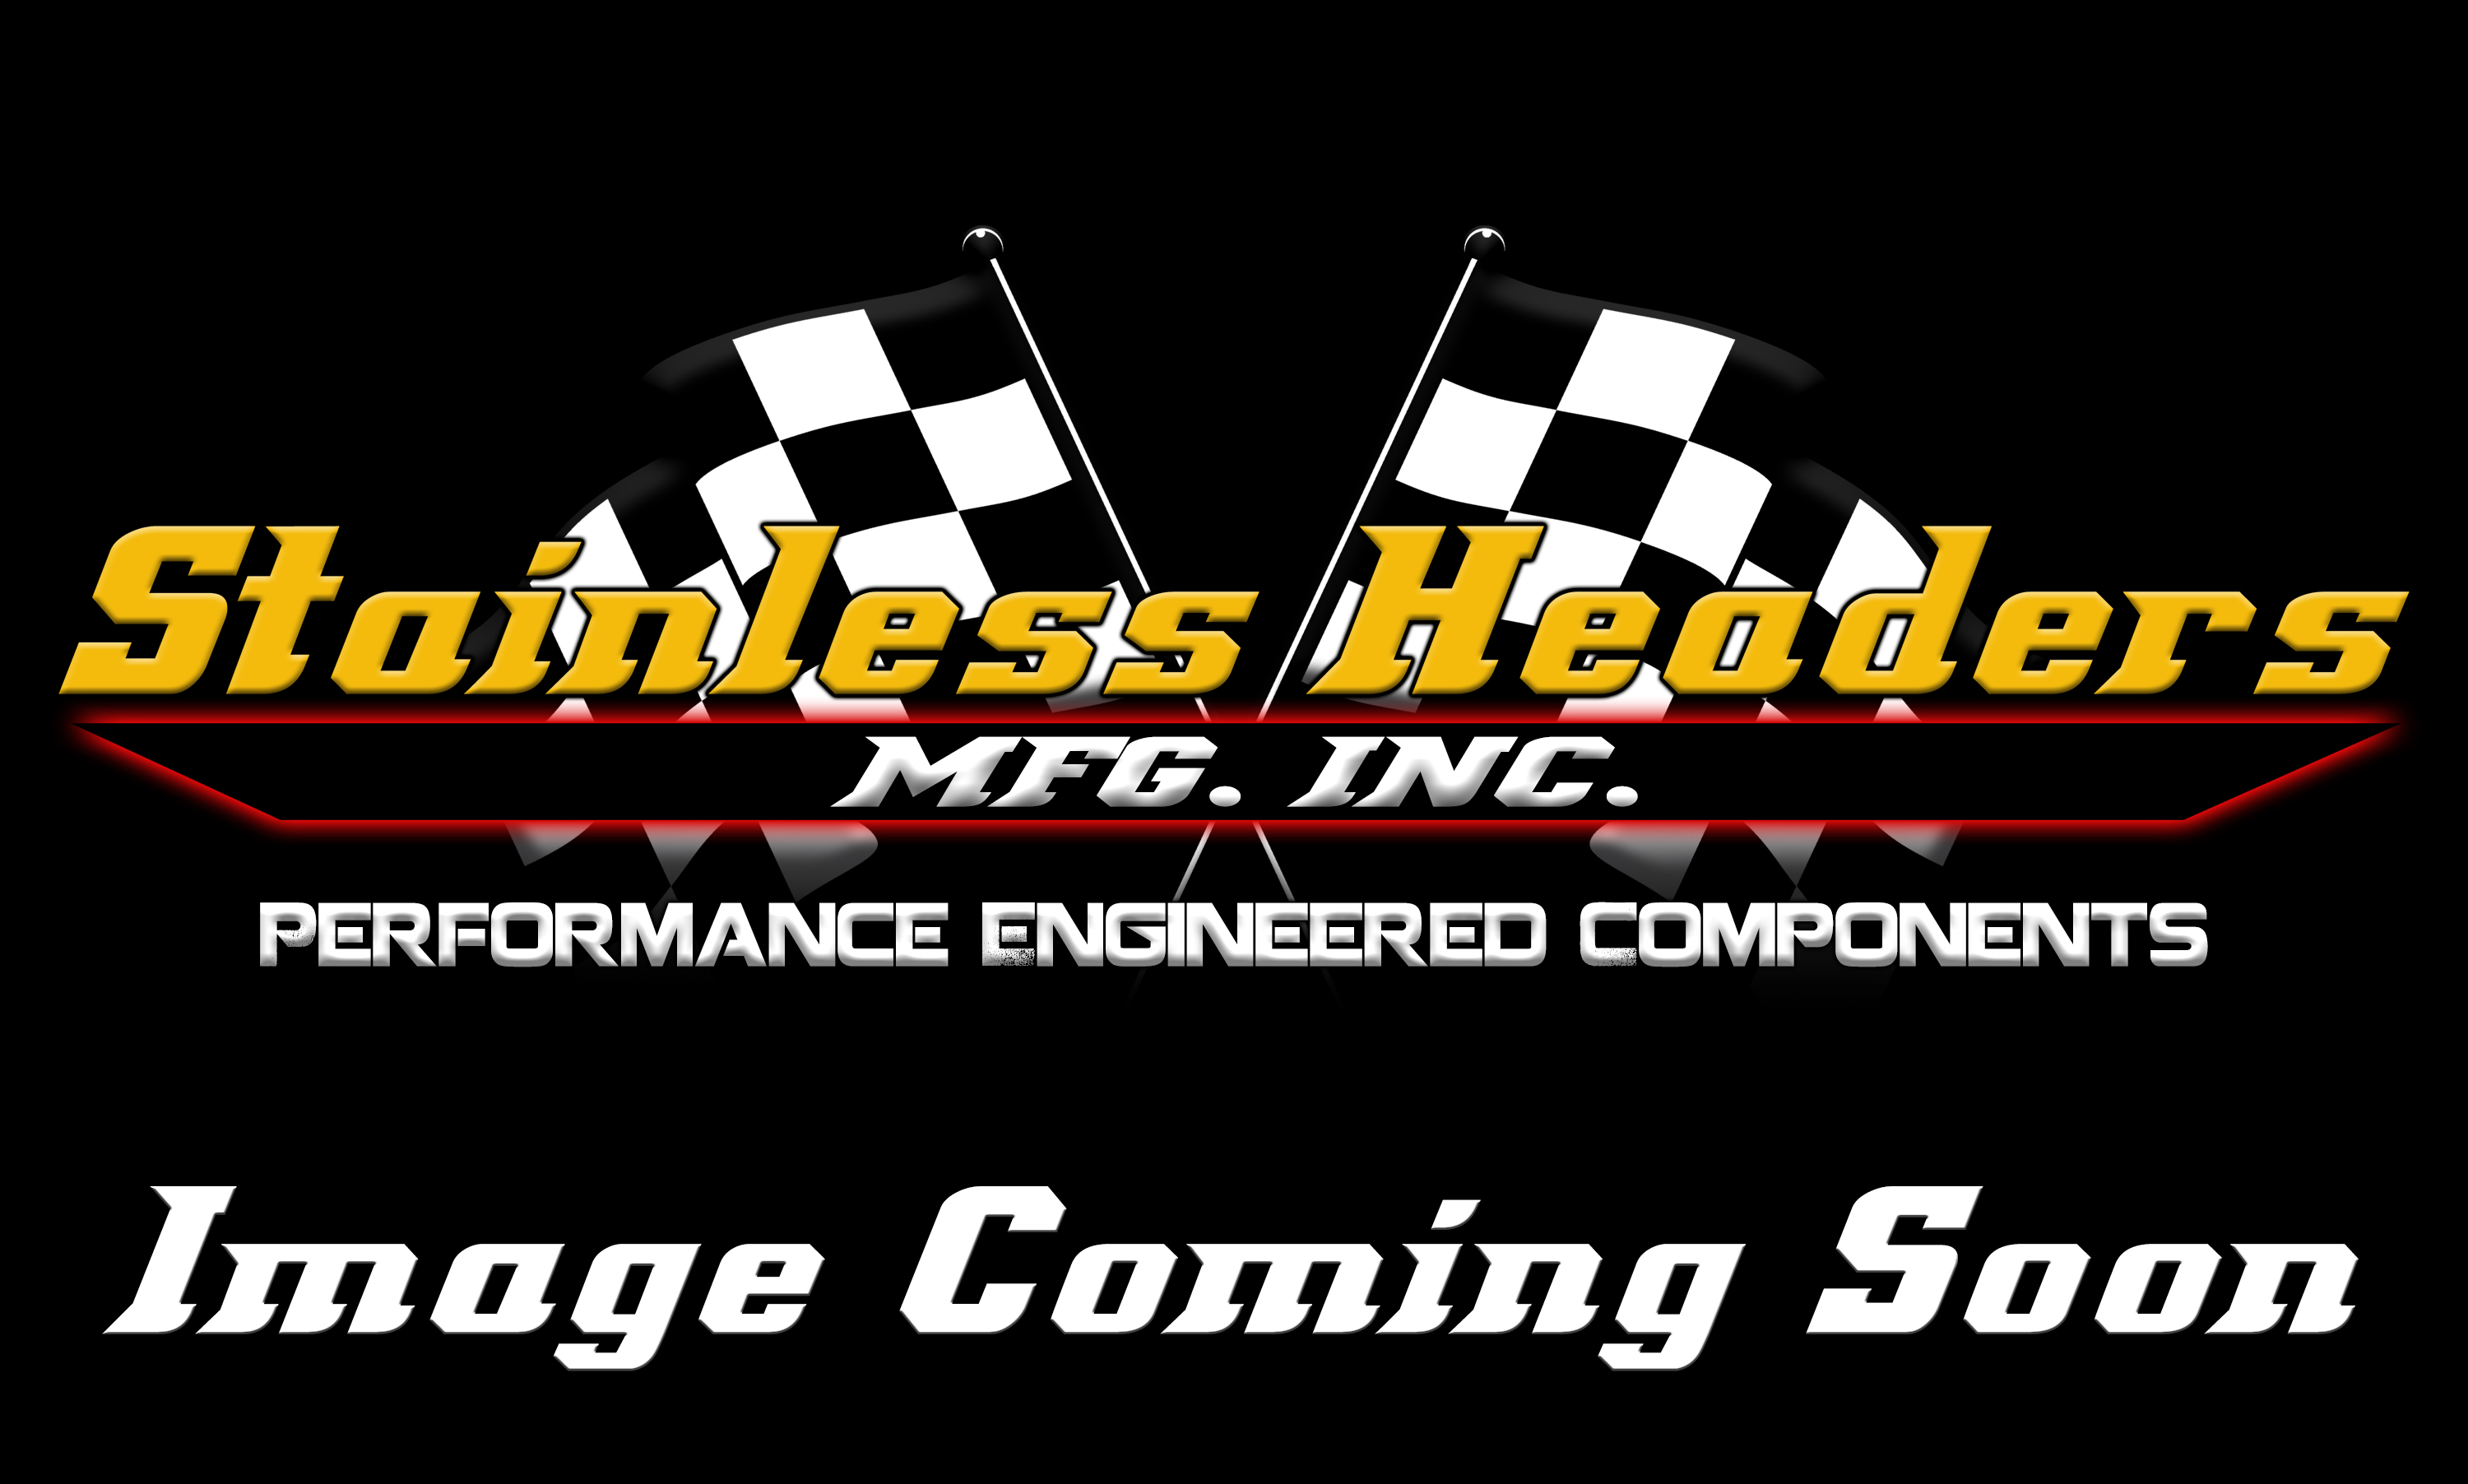 CompTurbo Technologies - CTR3893S-6767 Reverse Rotation Oil-Less 3.0 Turbocharger (1000 HP)